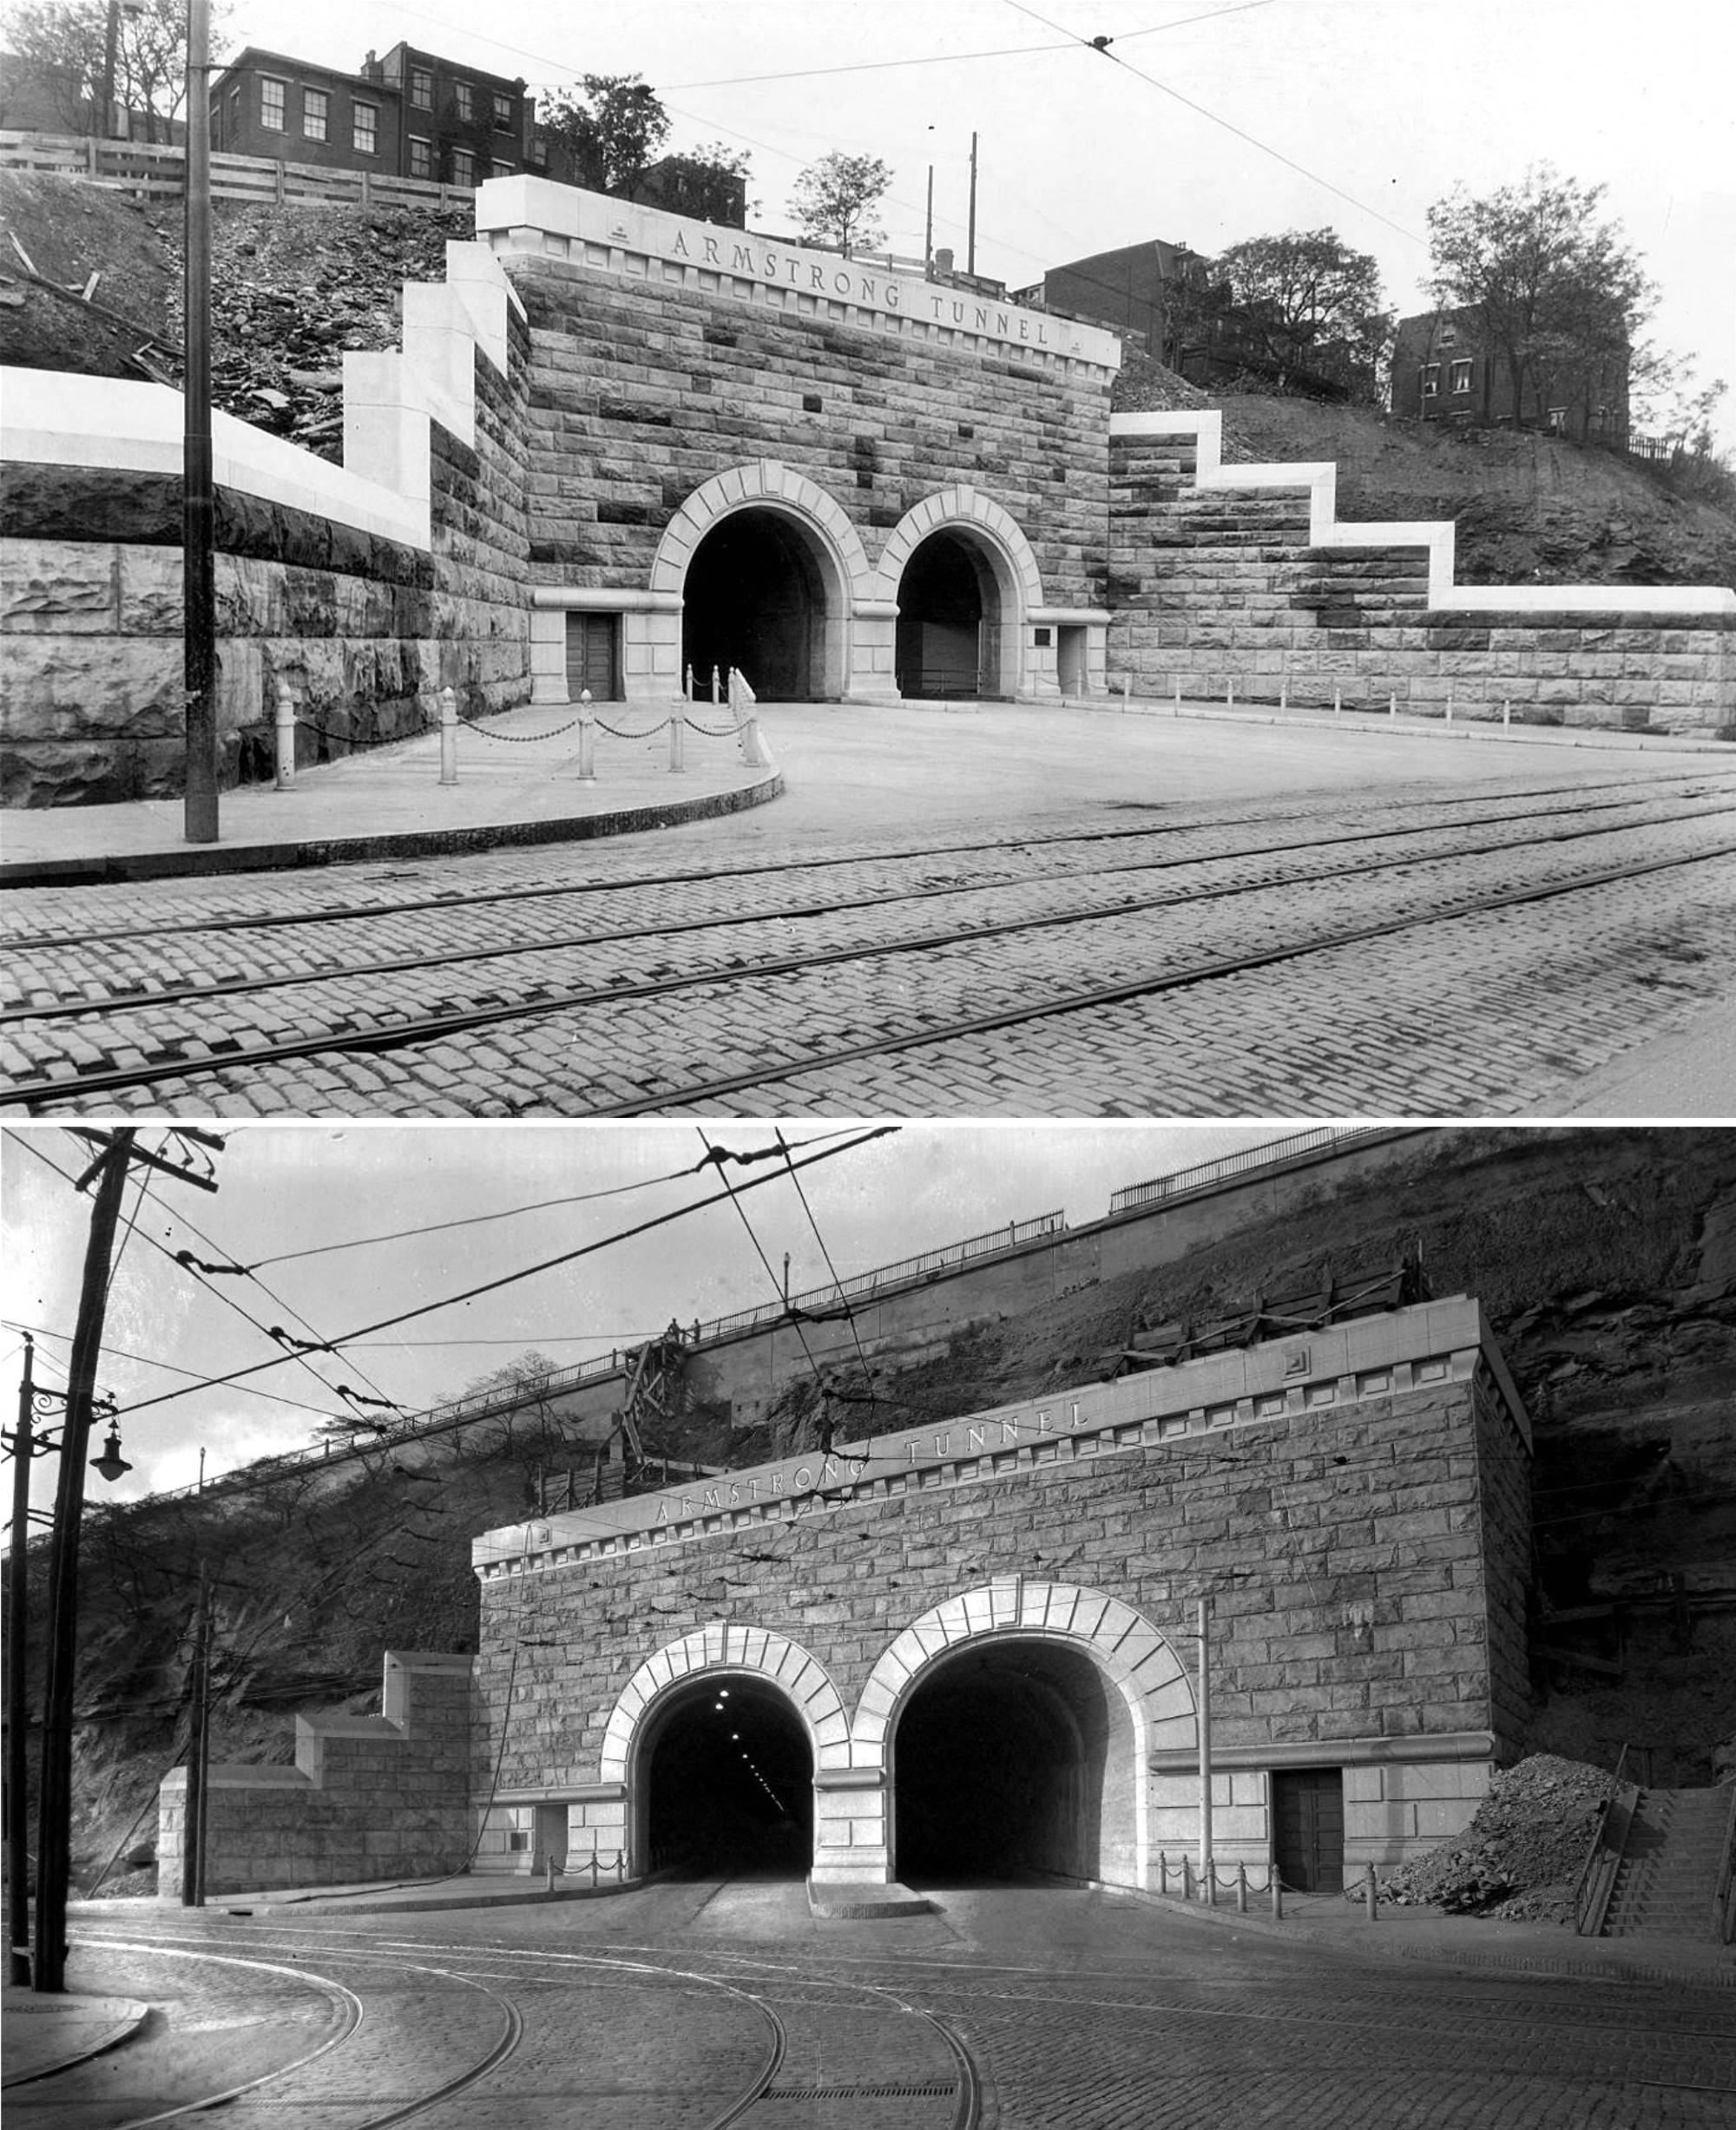 The Armstrong Tunnel north and south portals in 1927.